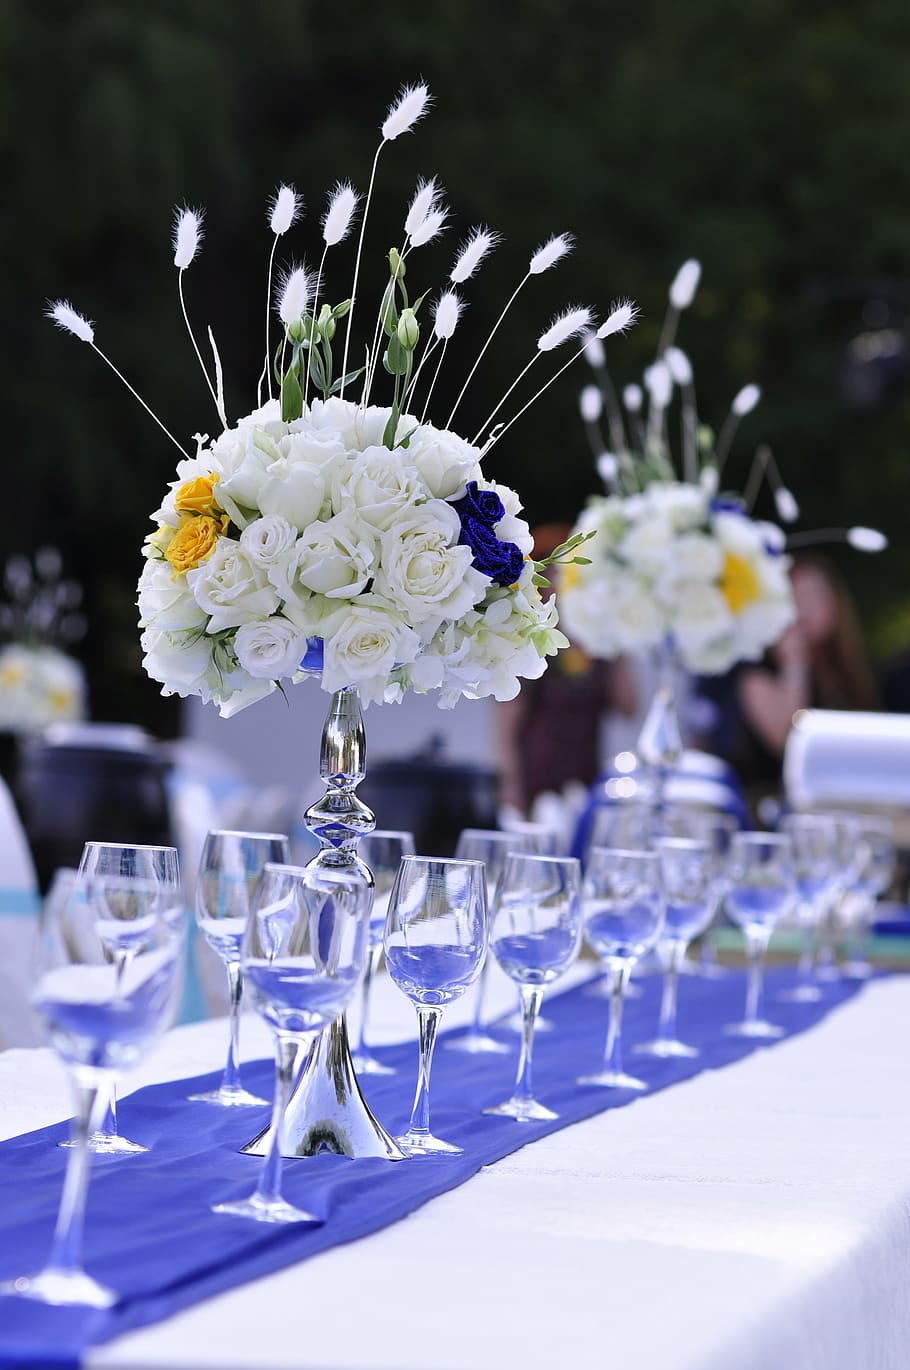 wedding, table flowers, western-style dining area, wine glasses, table, napkin, banquet, silverware, celebration, restaurant